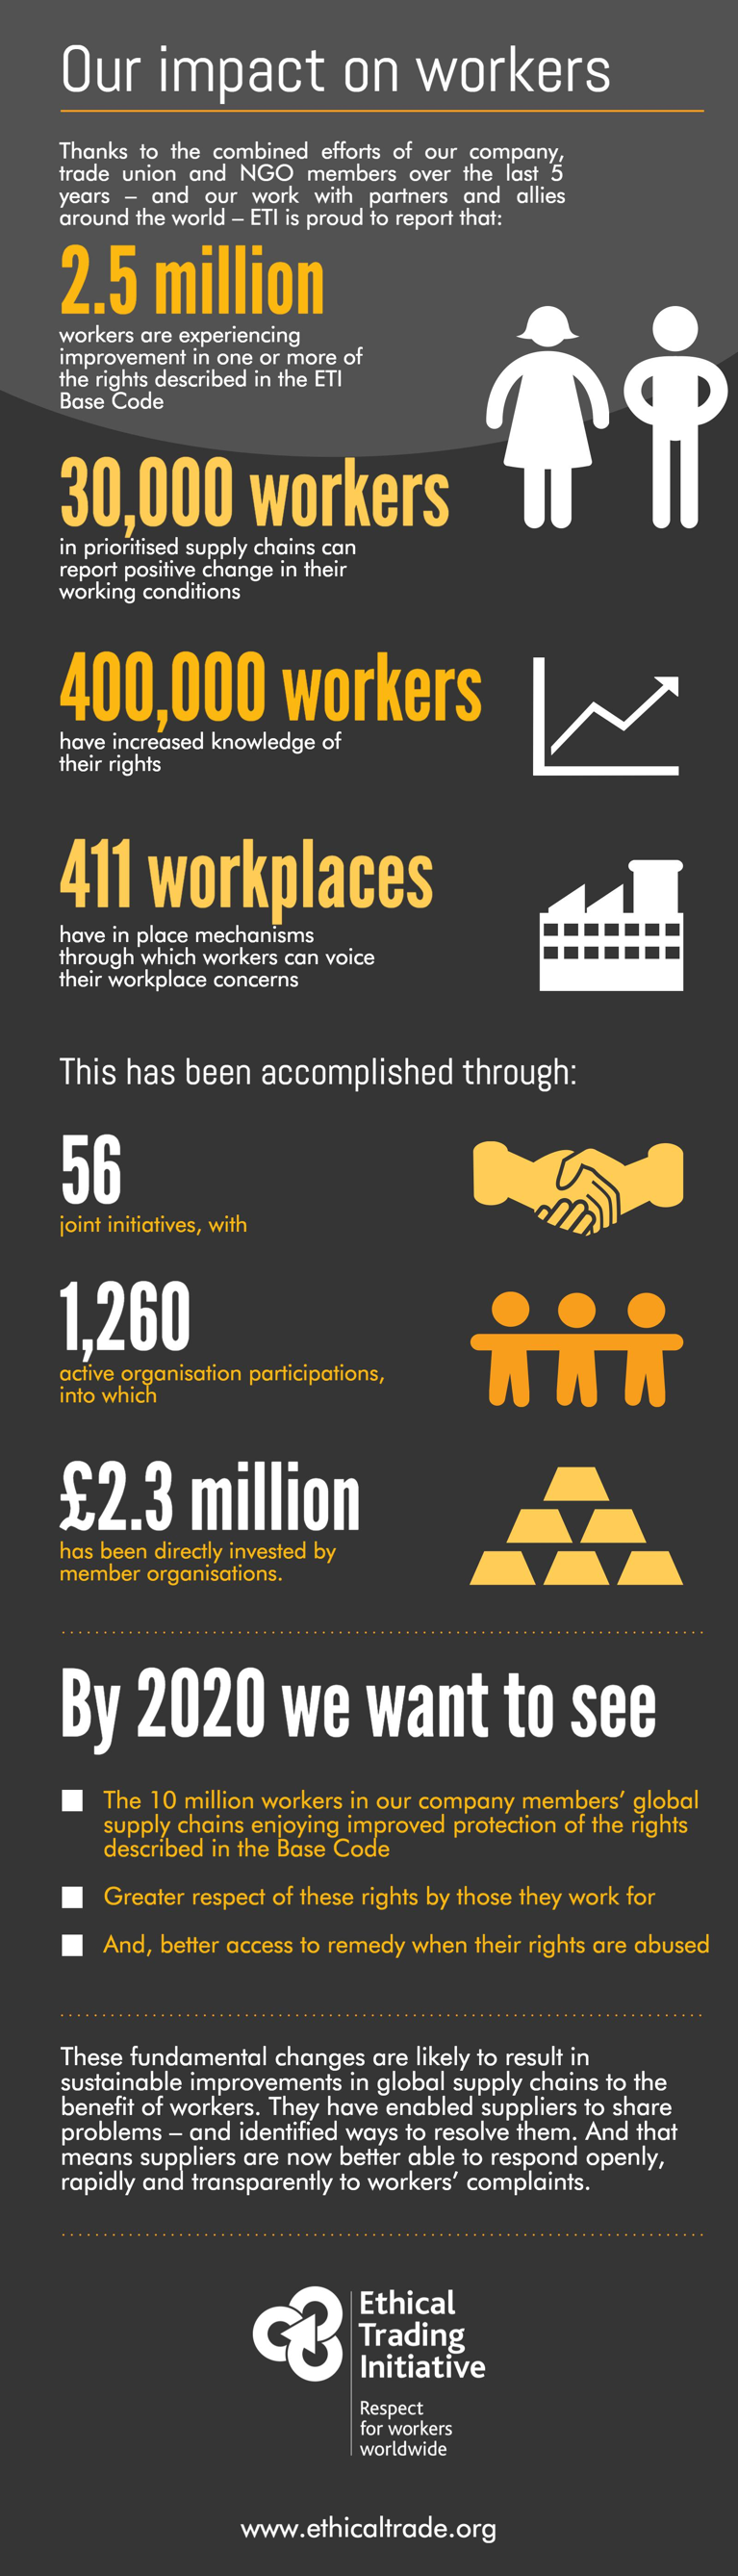 Infographic about our impact on workers